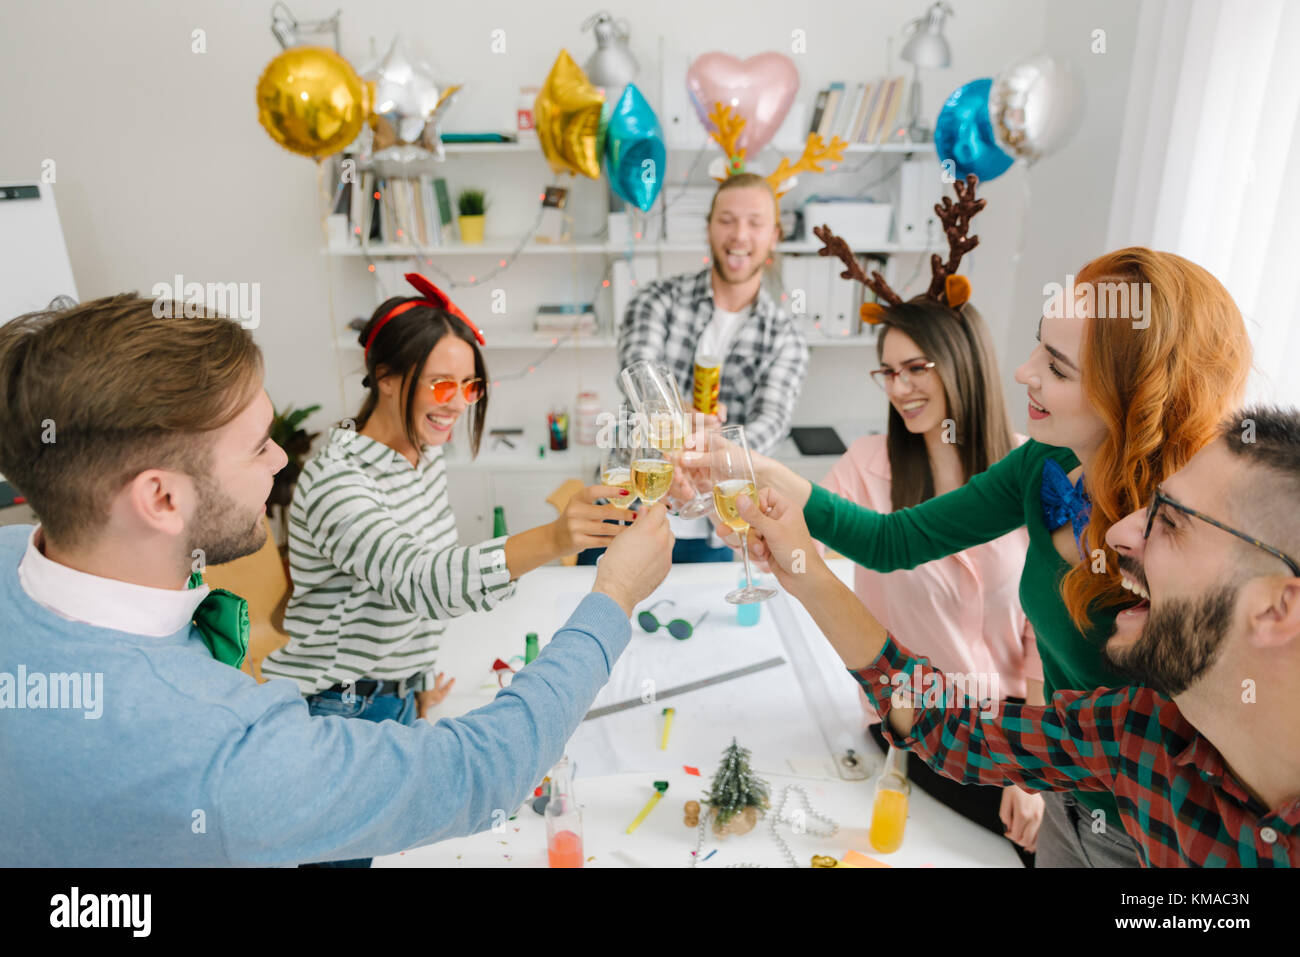 Employees toasting at office party Stock Photo